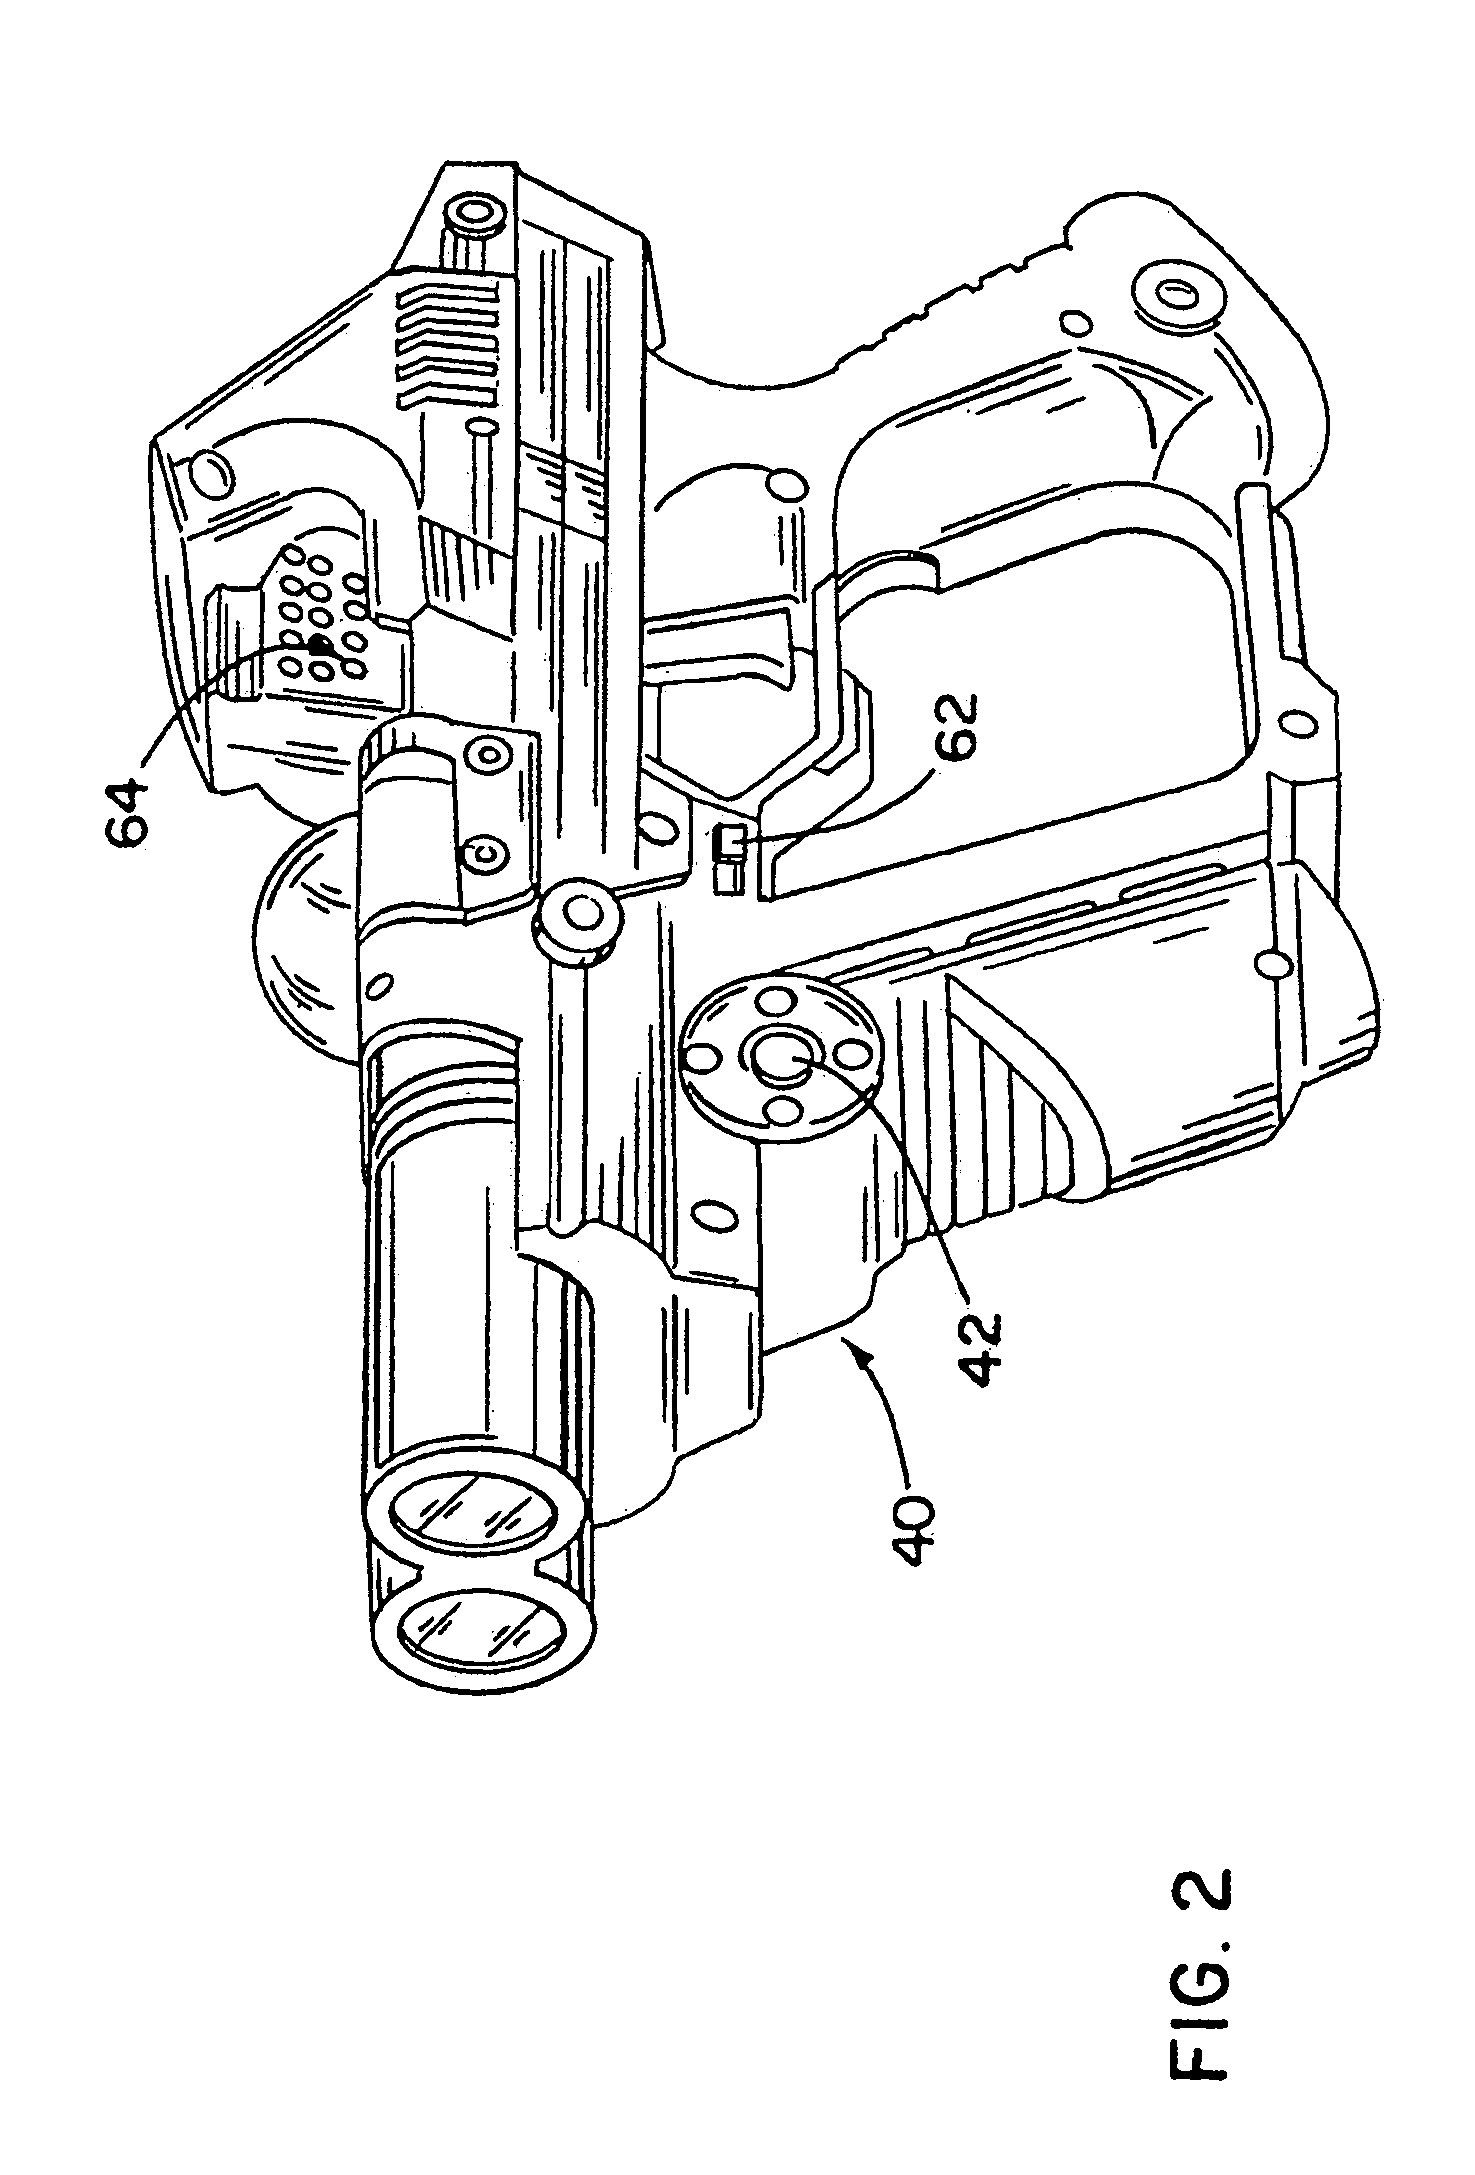 Device and method for an electronic tag game